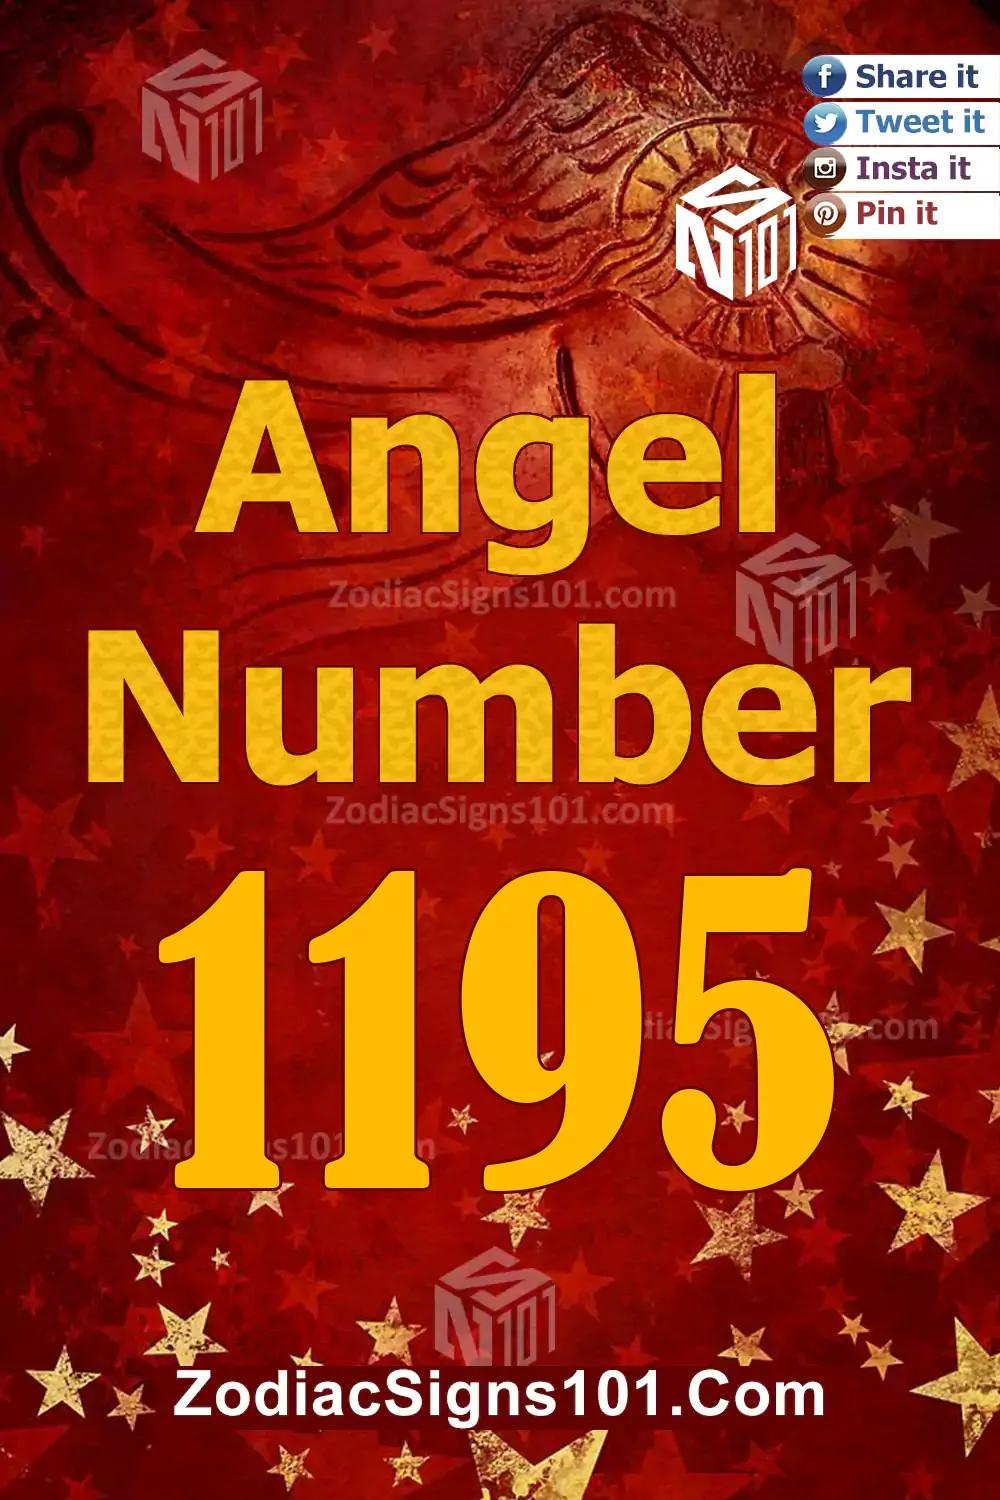 1195 Angel Number Meaning